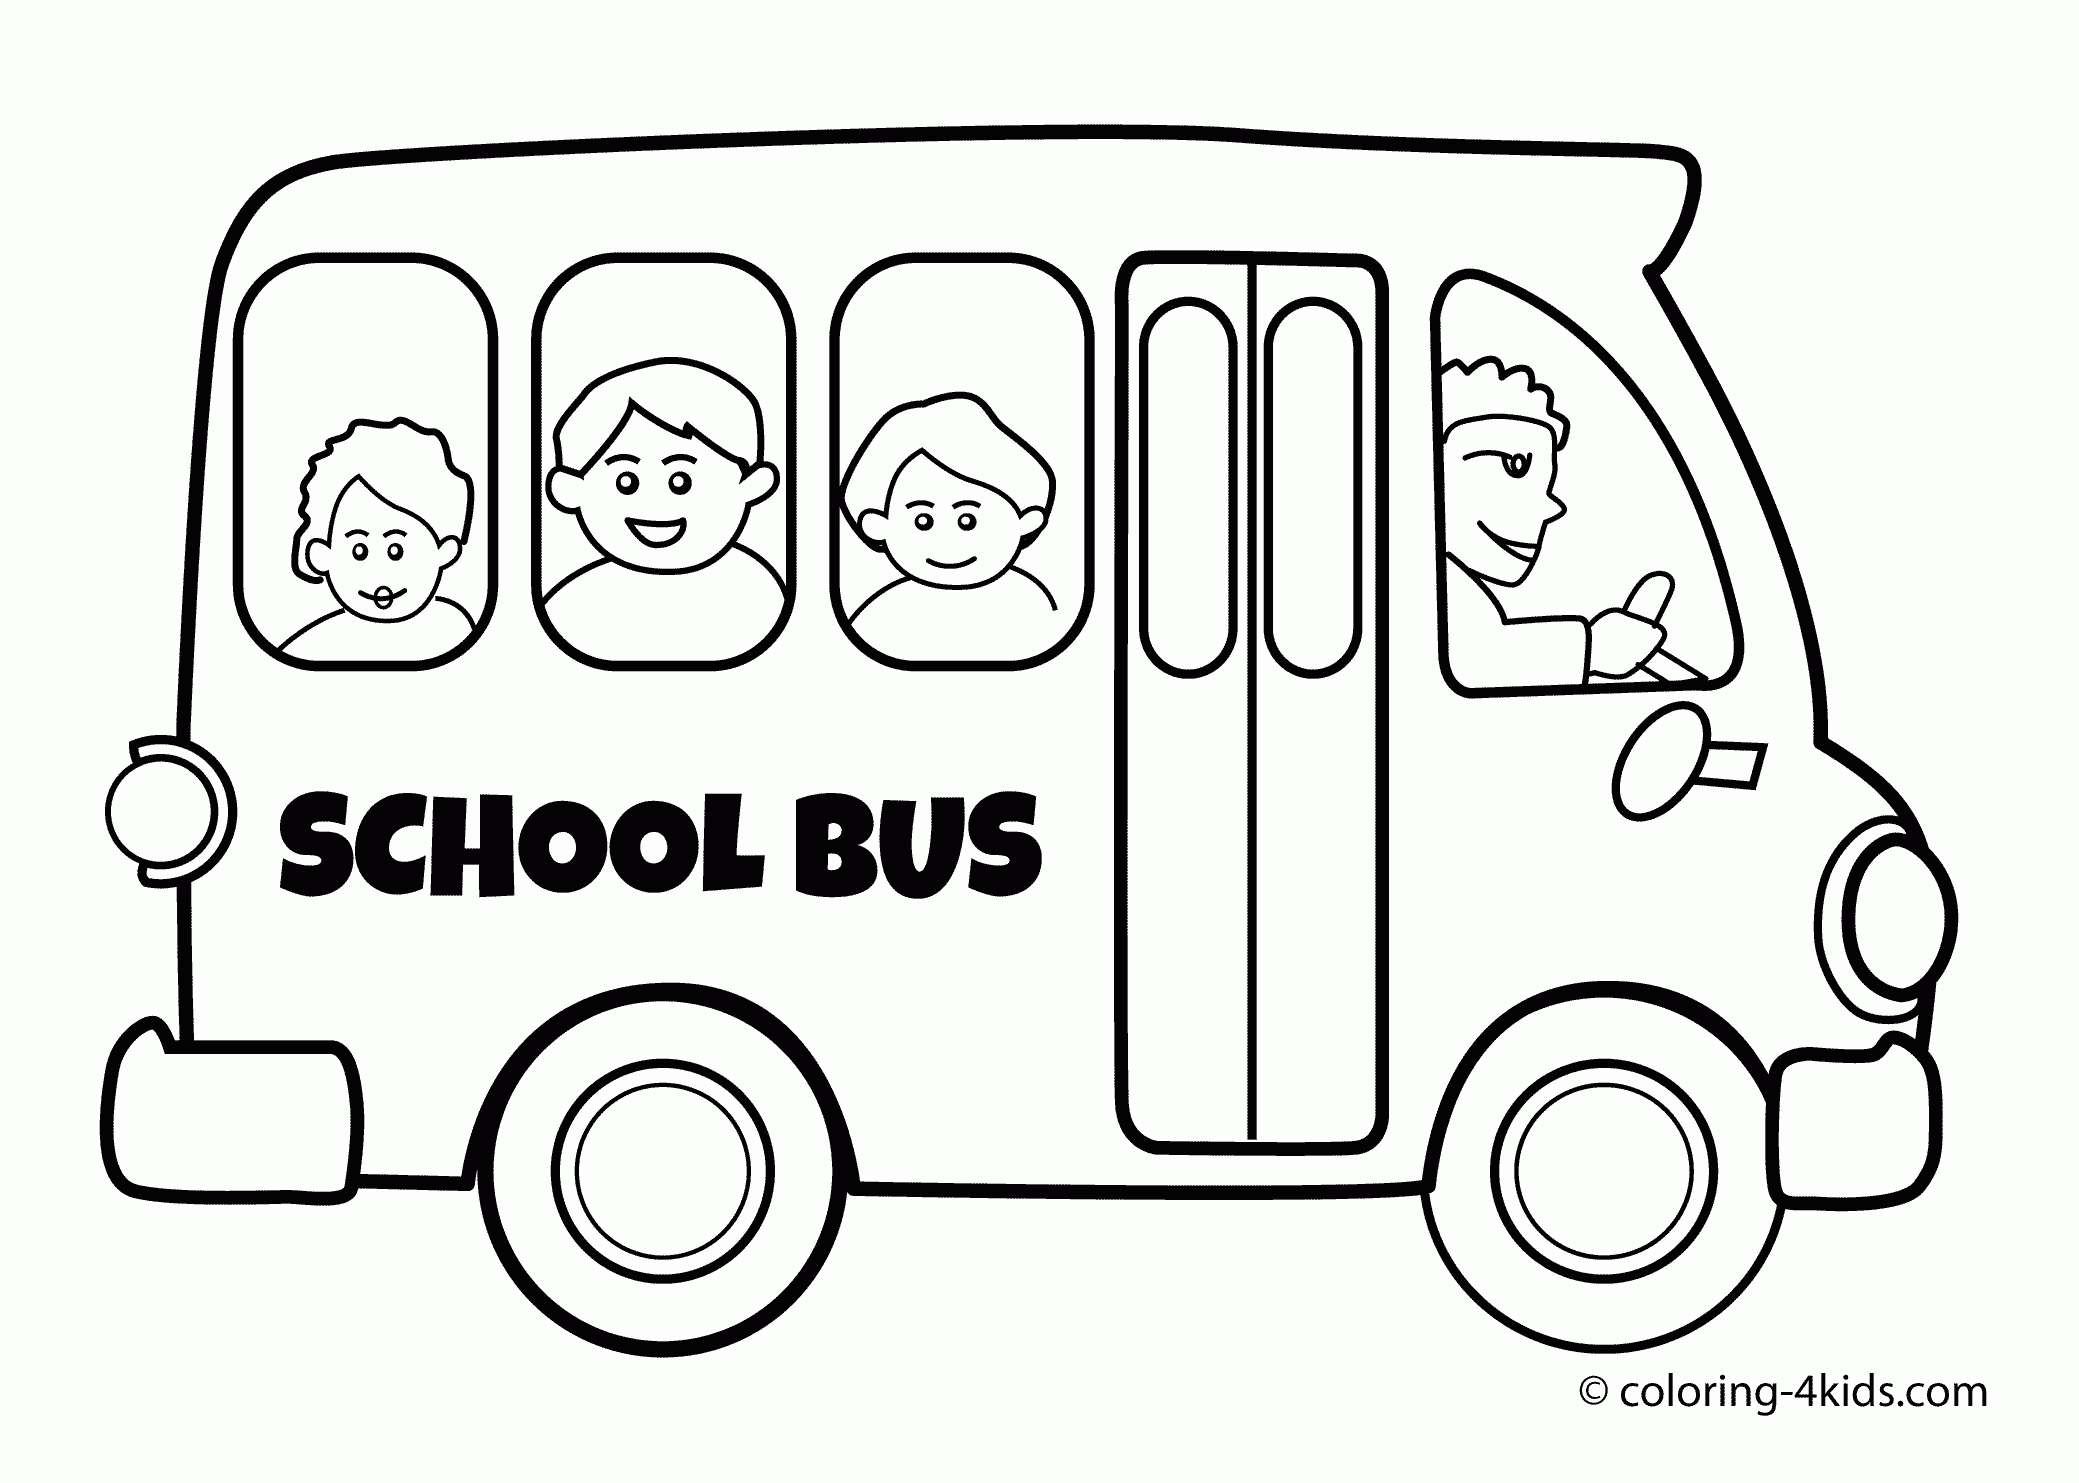 School Bus Transportation Coloring Pages For Kids, Printable - Free Printable School Bus Coloring Pages